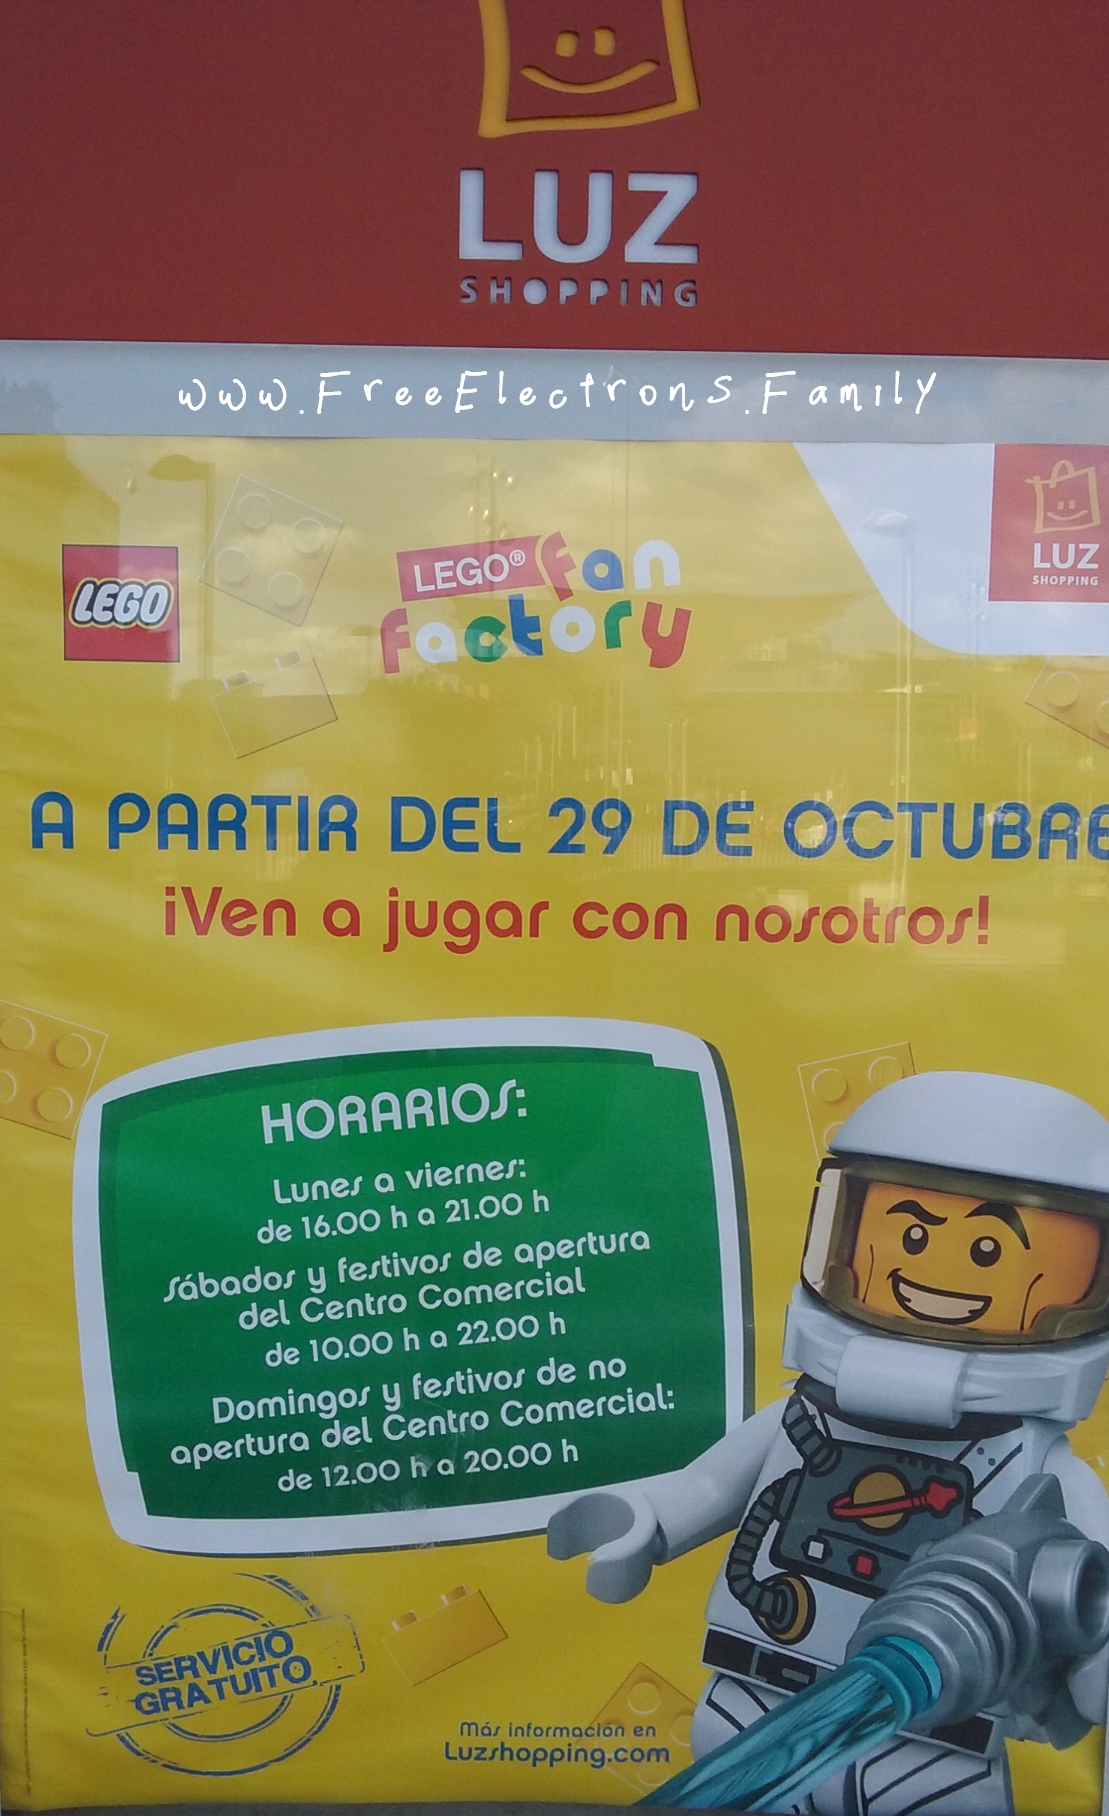 LEGO Fan Factory Hours (may change during holidays) beginning 29 October 2018.